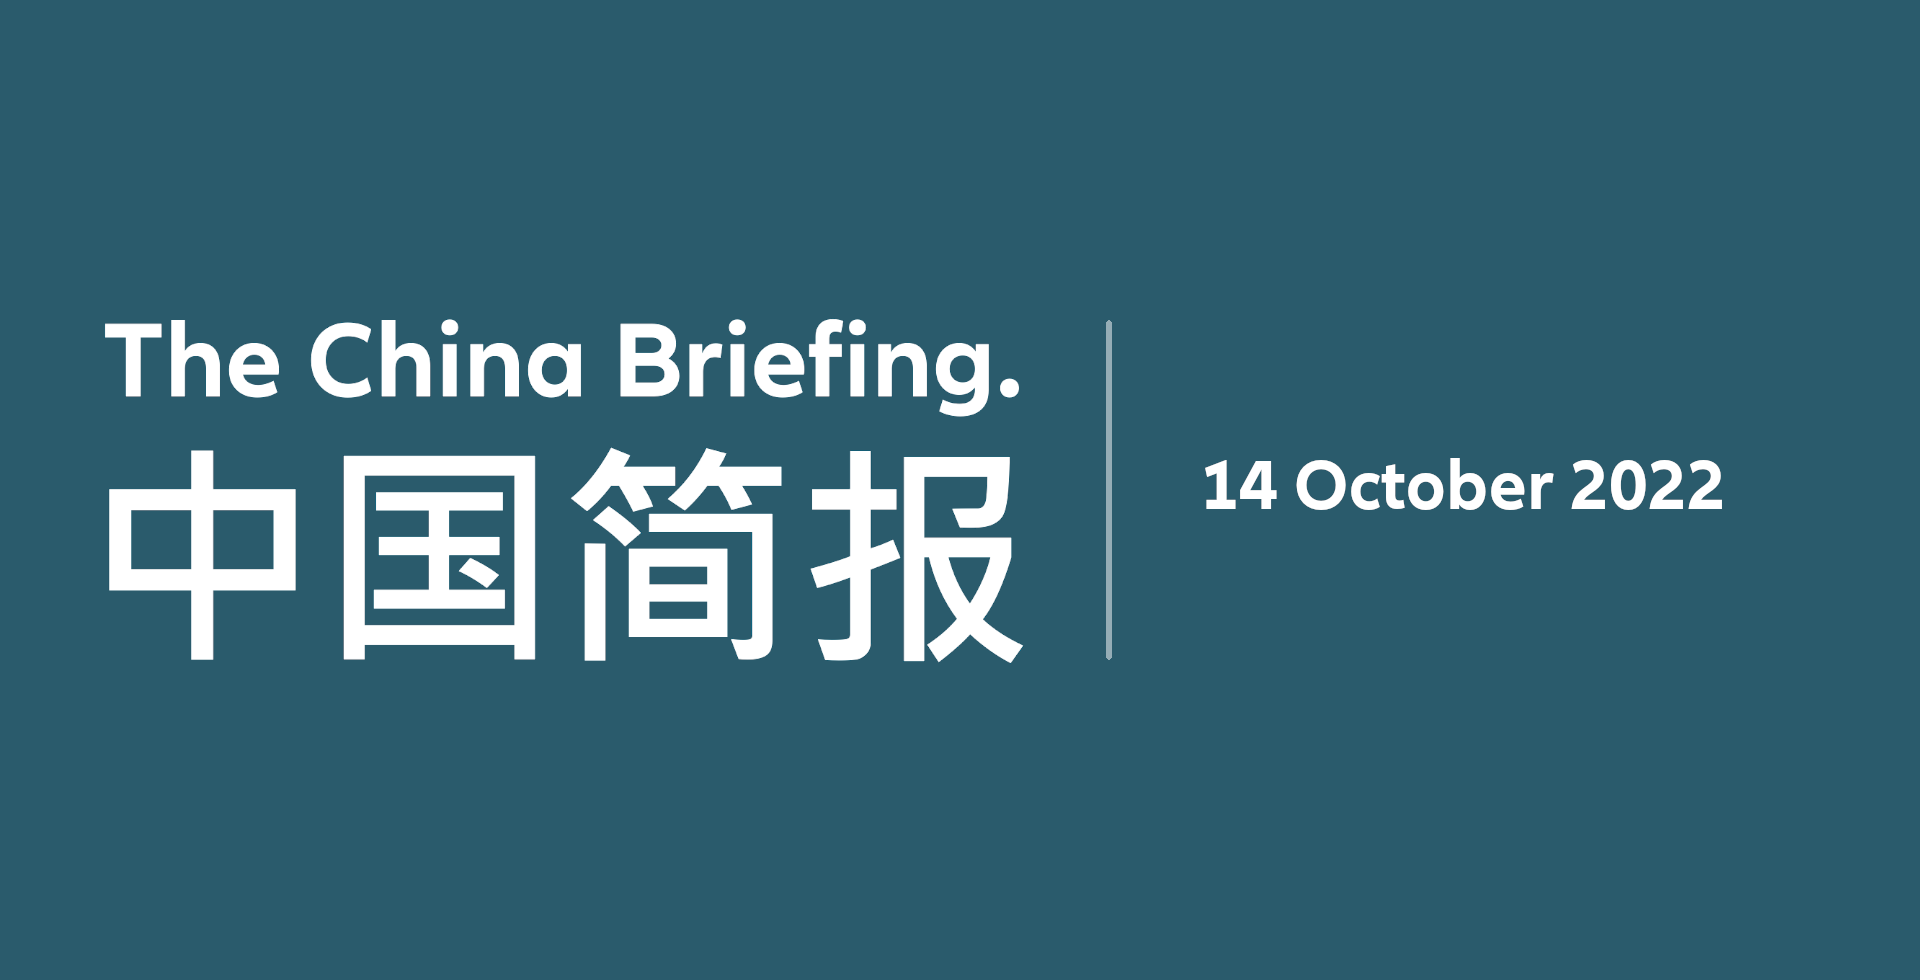 The China Briefing 14th of October 2022